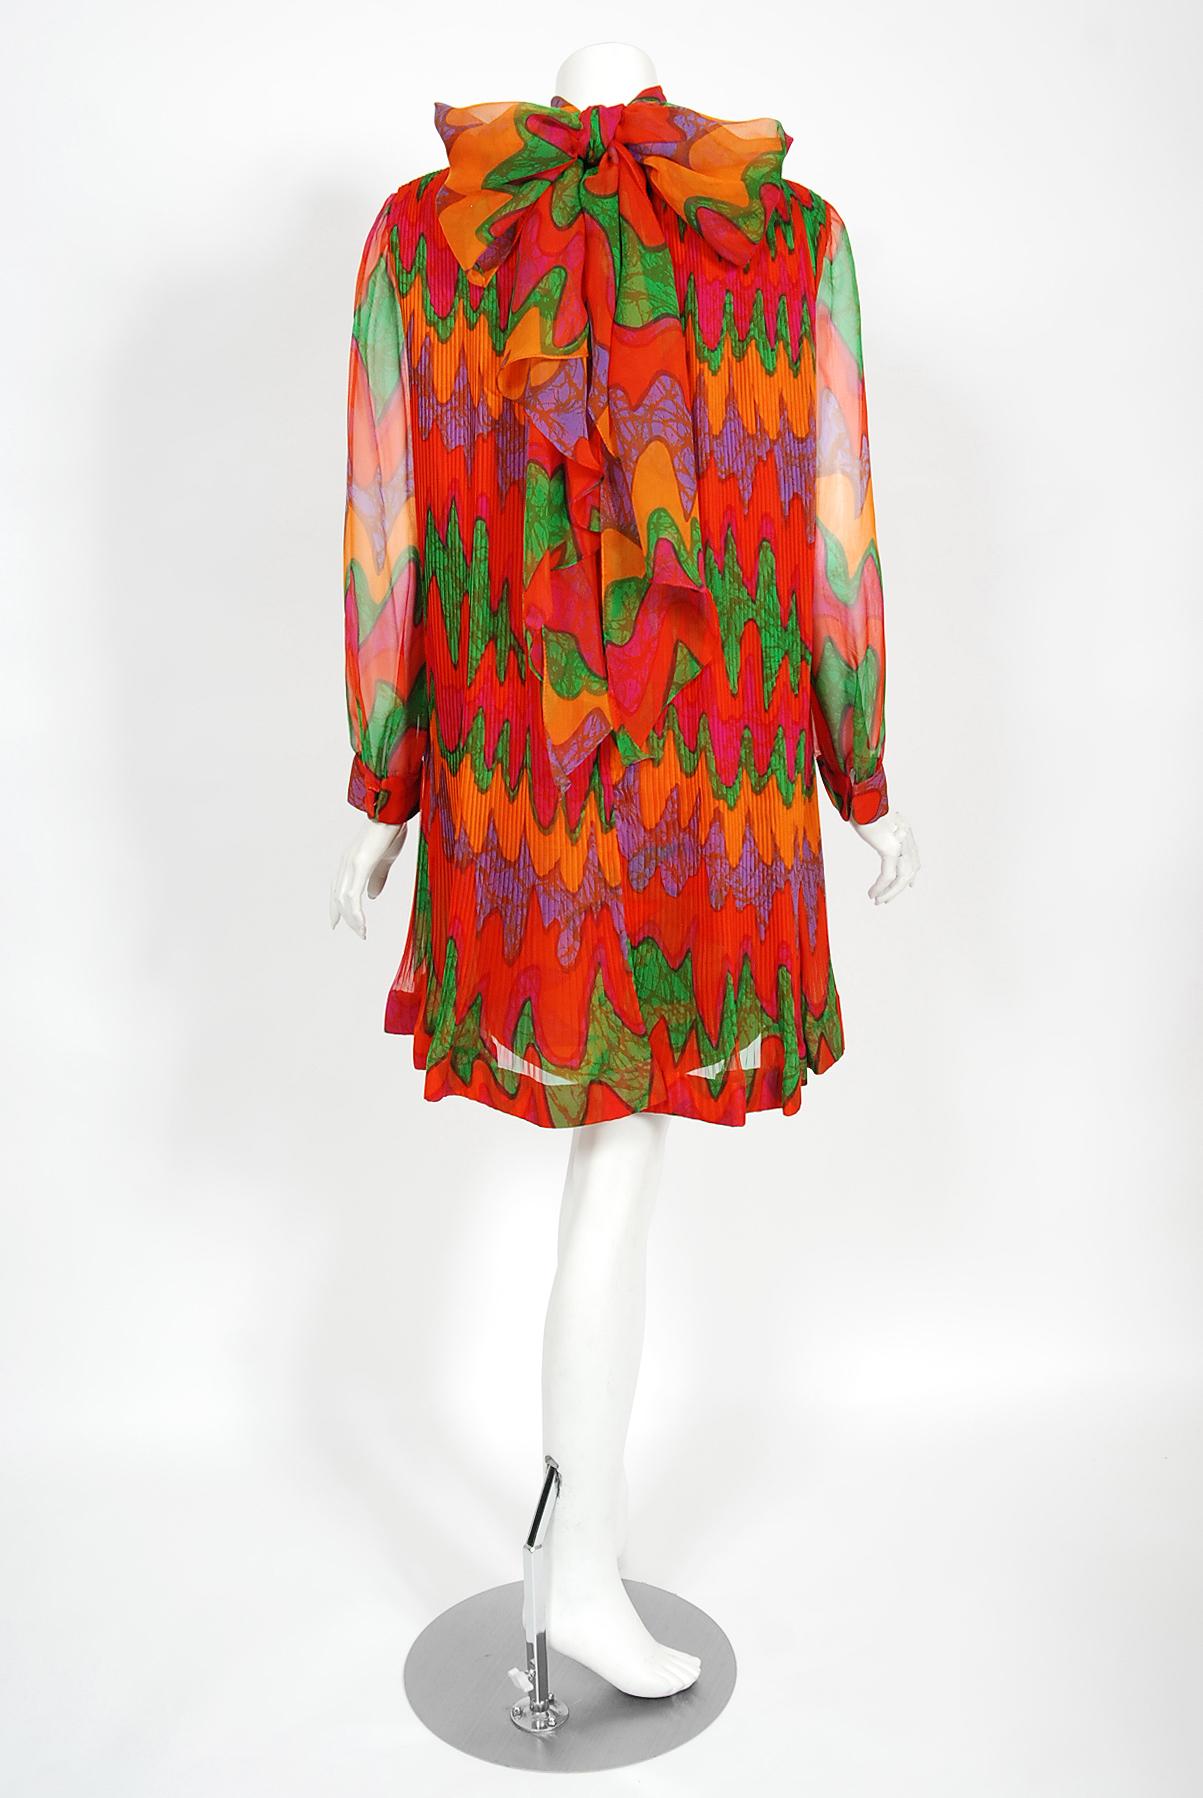 Vintage 1968 Pierre Cardin Colorful Psychedelic Pleated Chiffon Mod Mini Dress 10